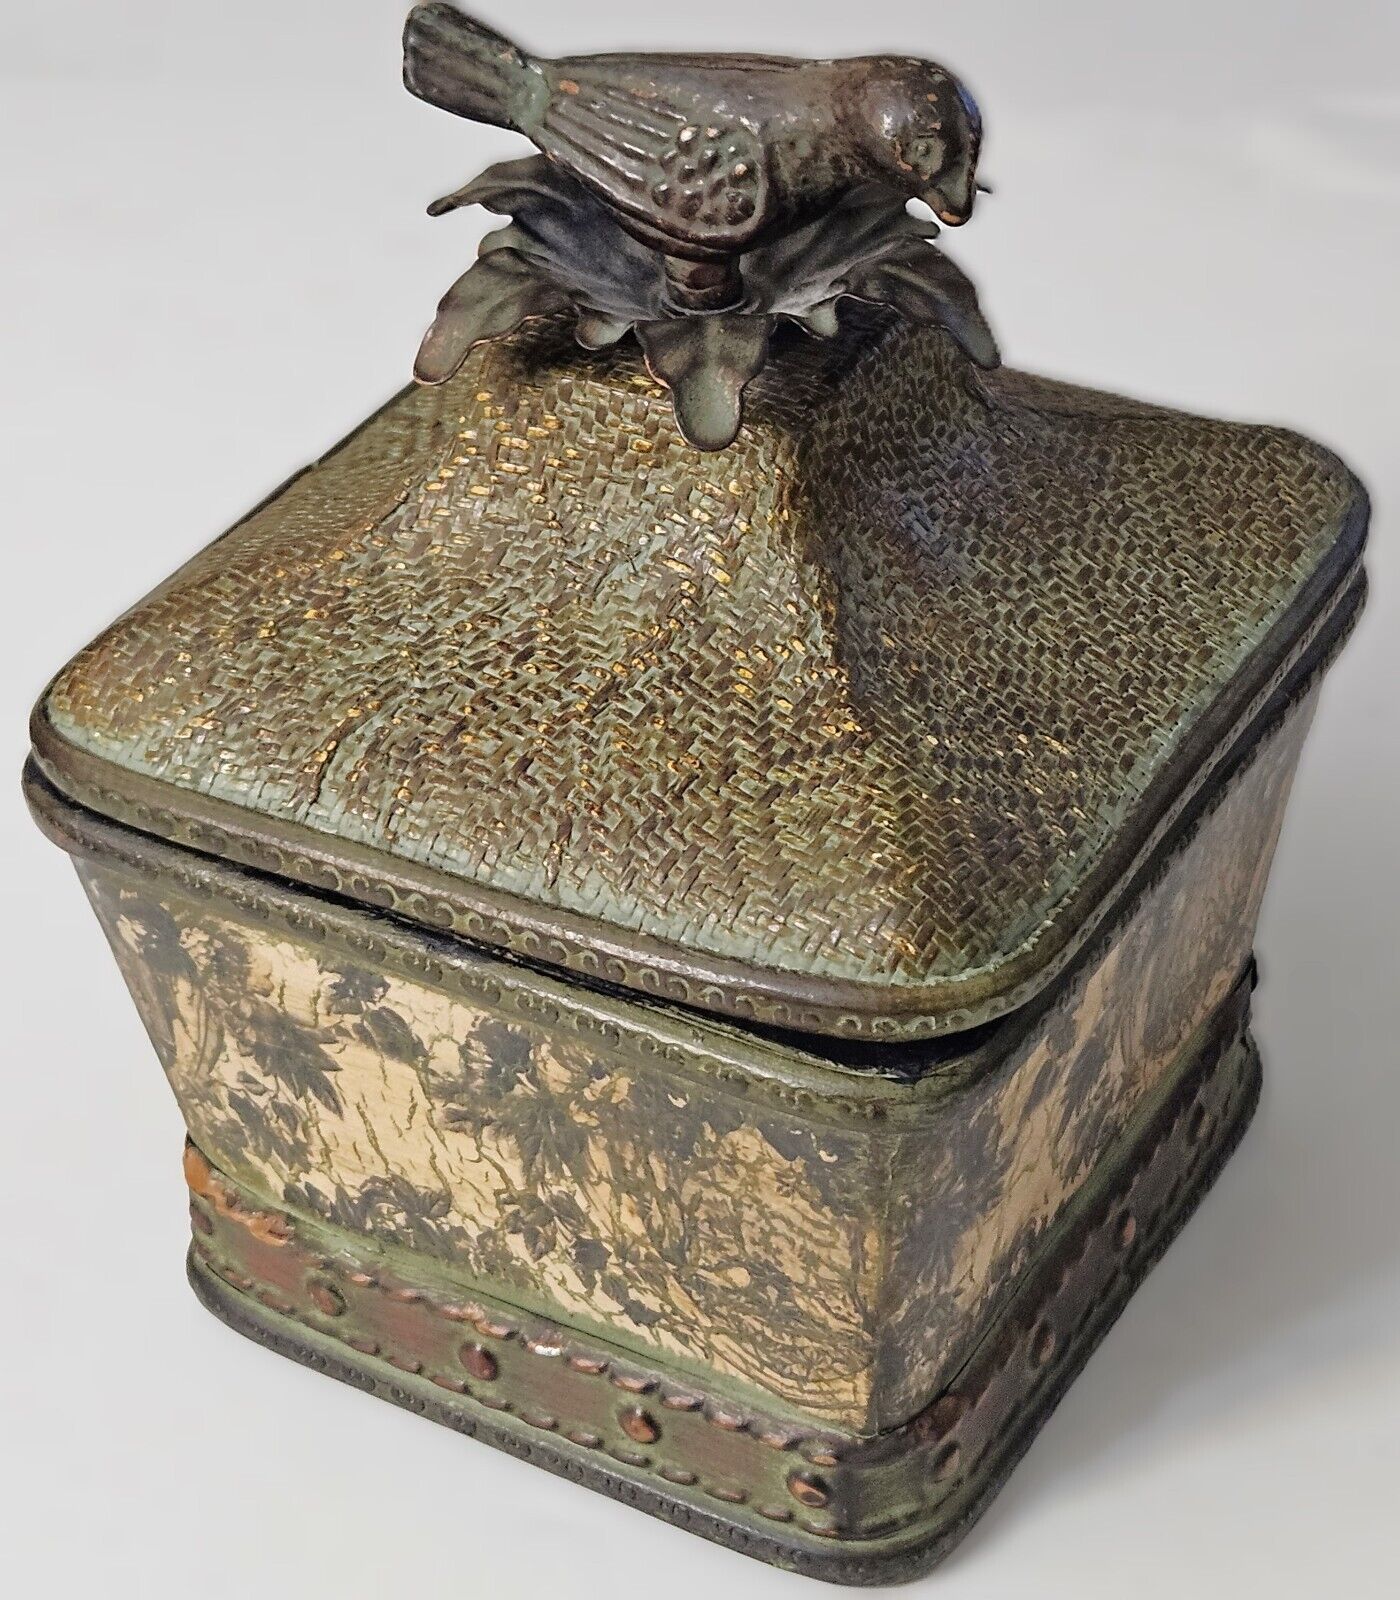 Vintage Hand-Crafted Ornate Trinket Box with Metal Bird Accent